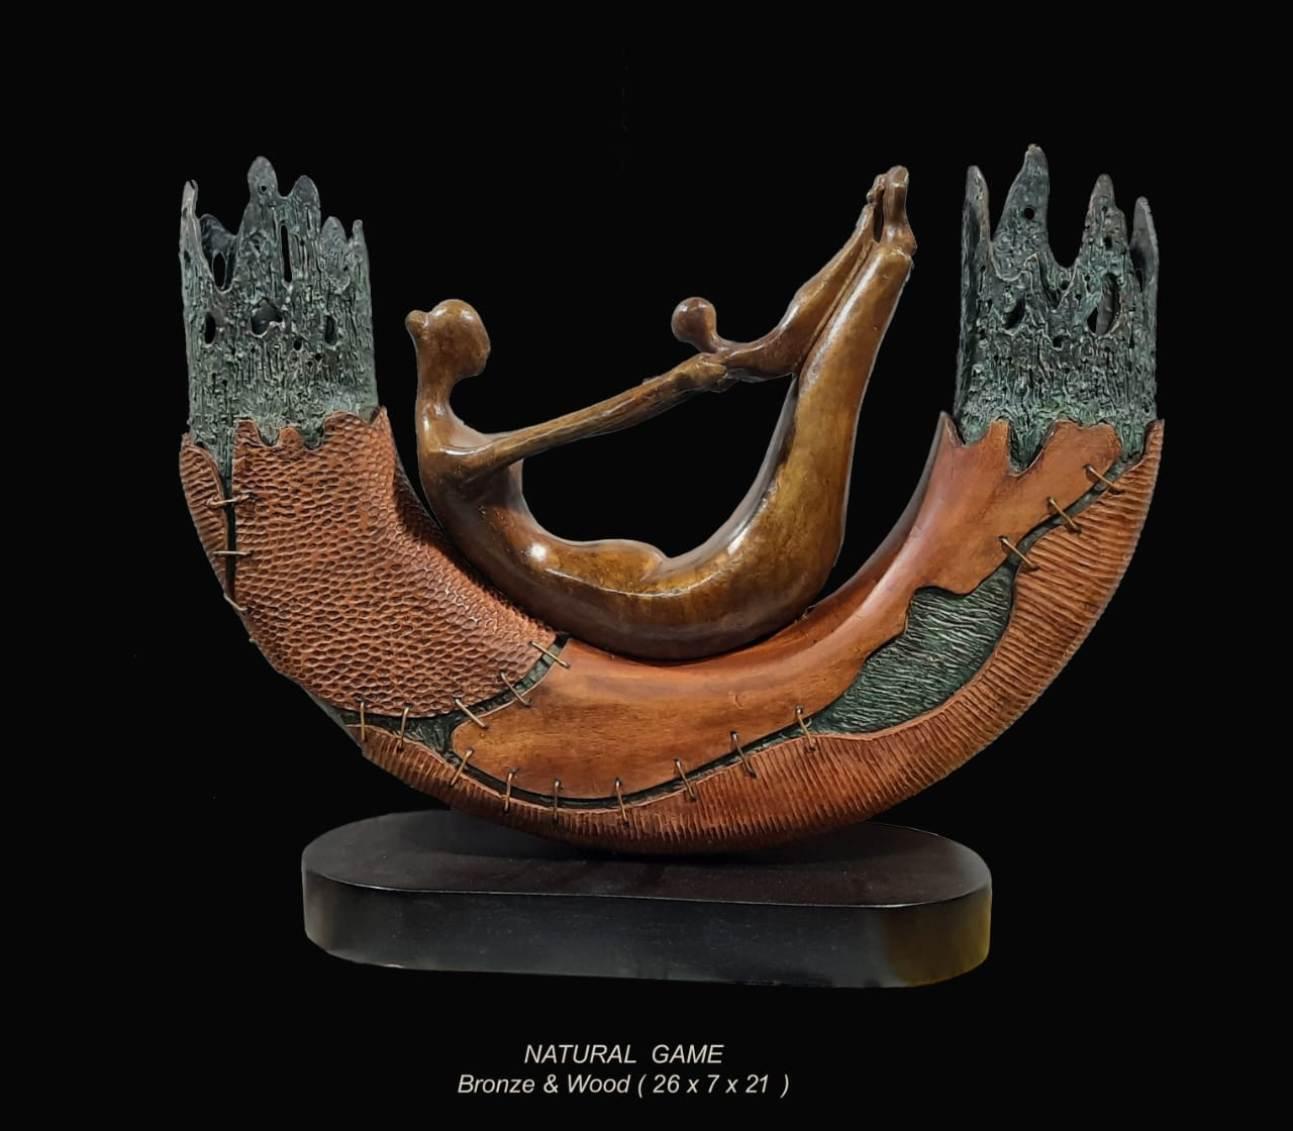 Natural Game, Figurative, Bronze & Wood by Contemporary Indian Artist "In Stock"